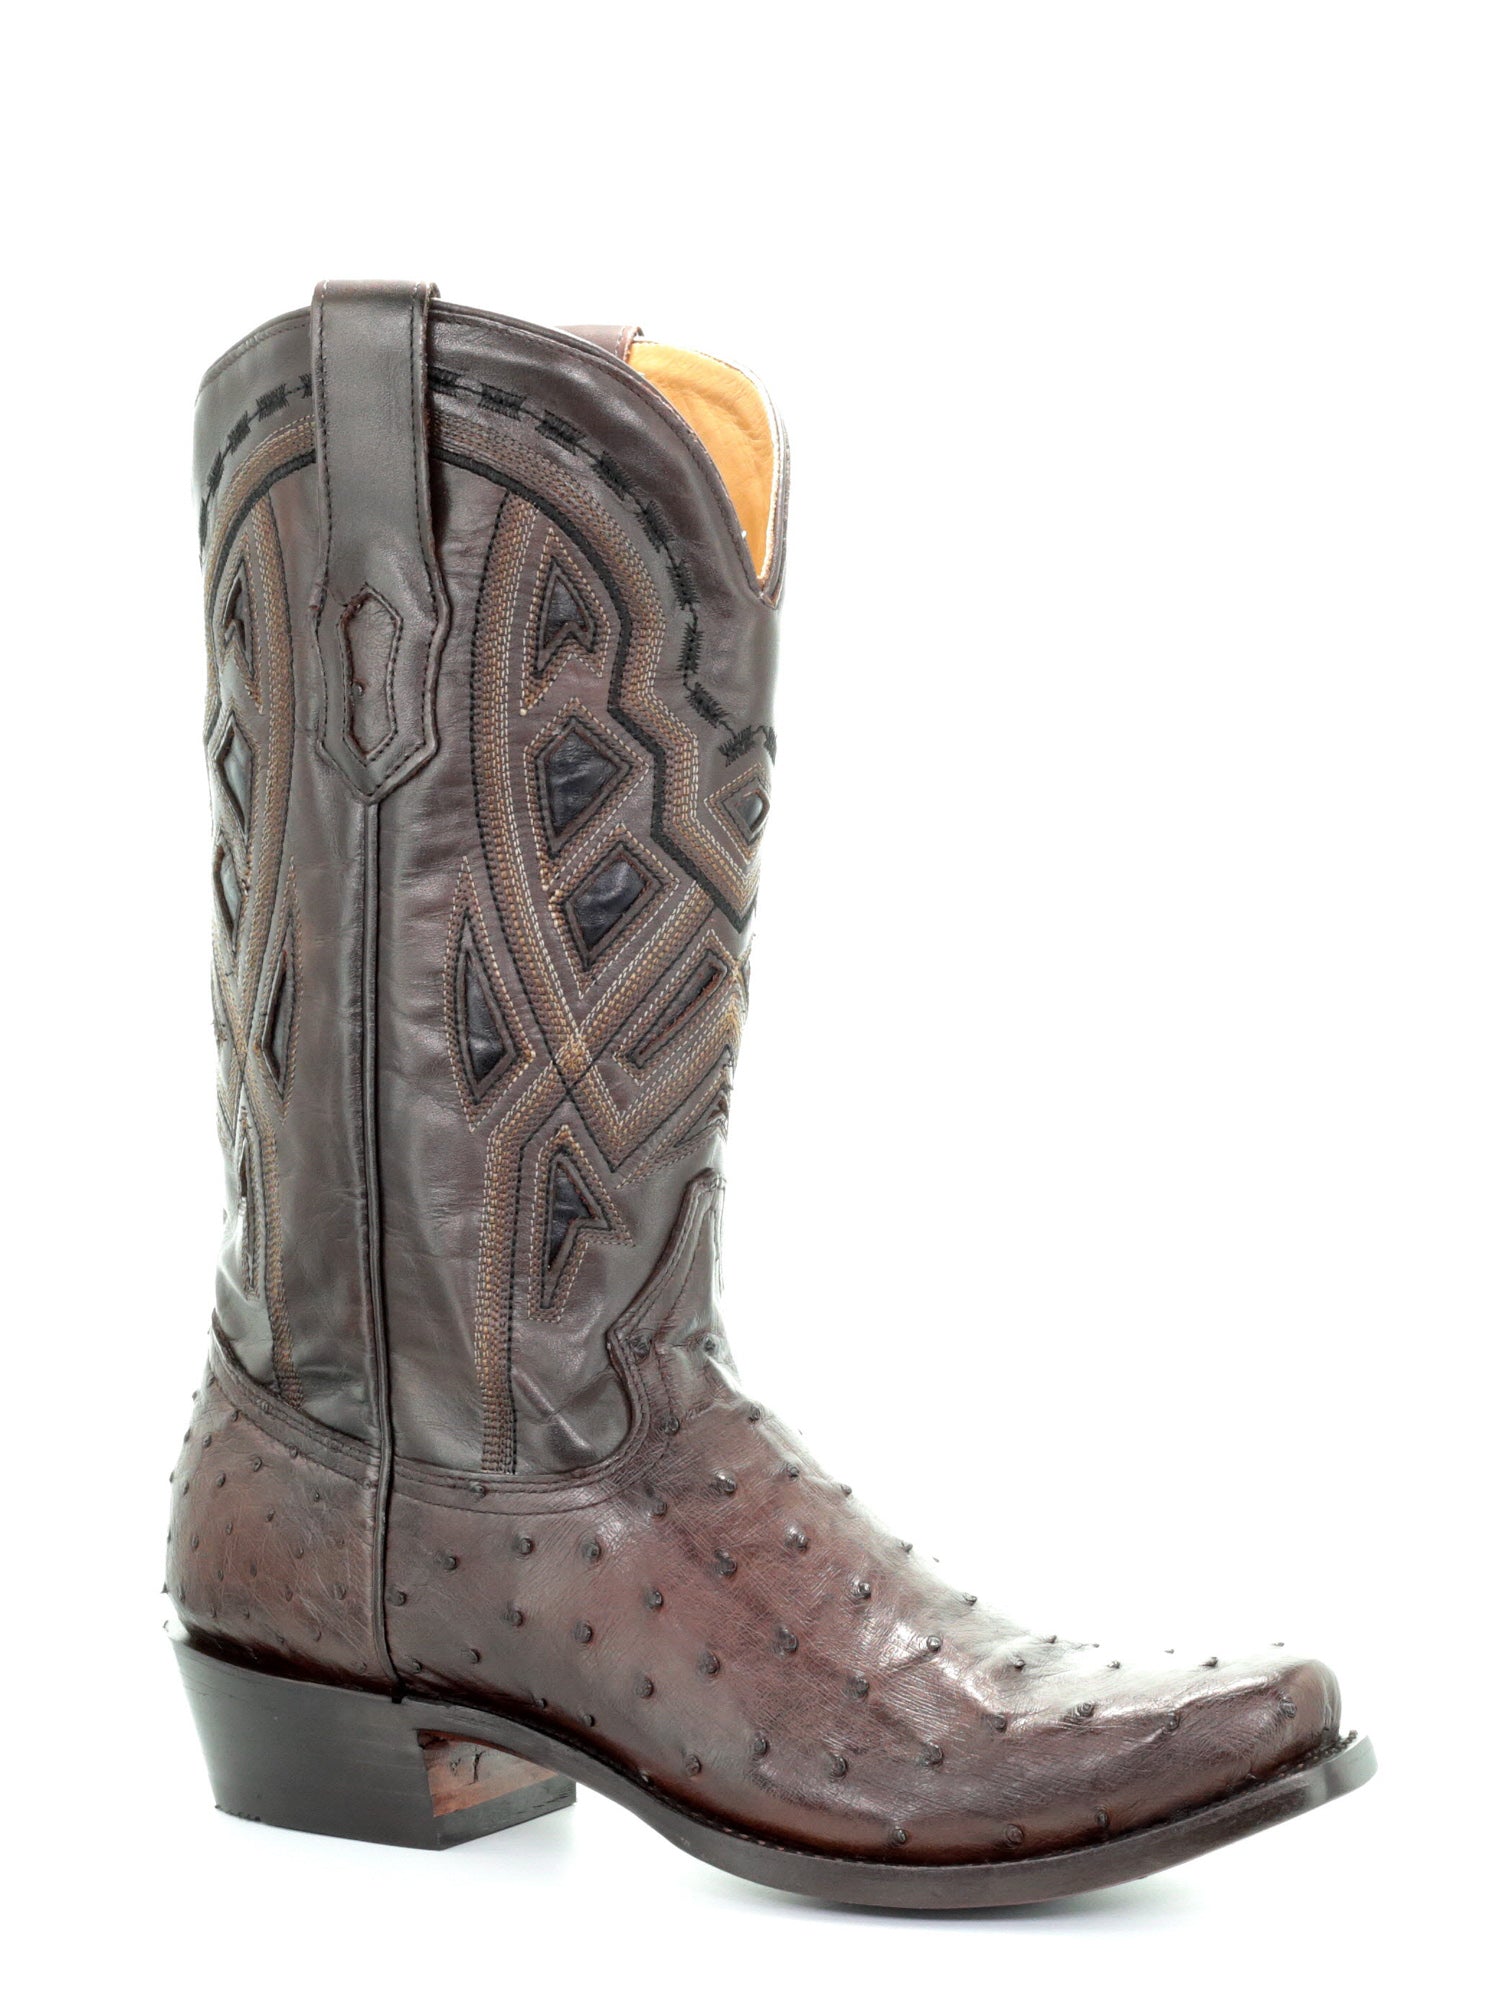 mens corral boots